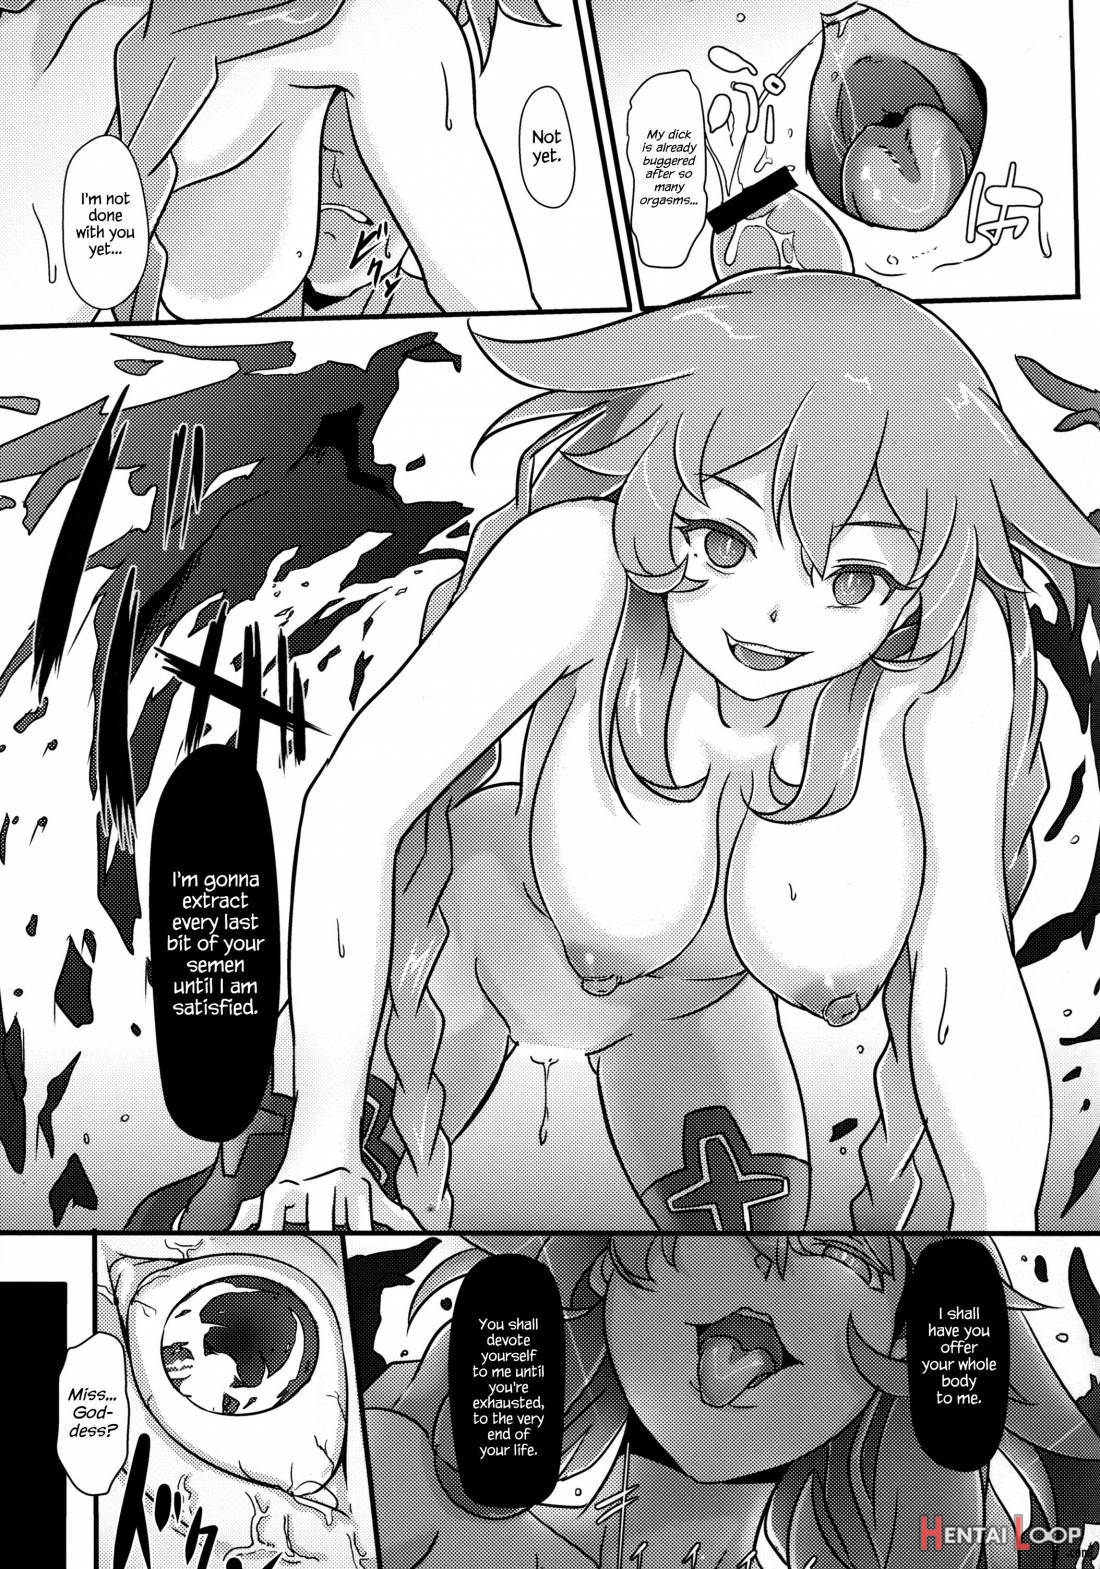 Nightmare from goddess page 22